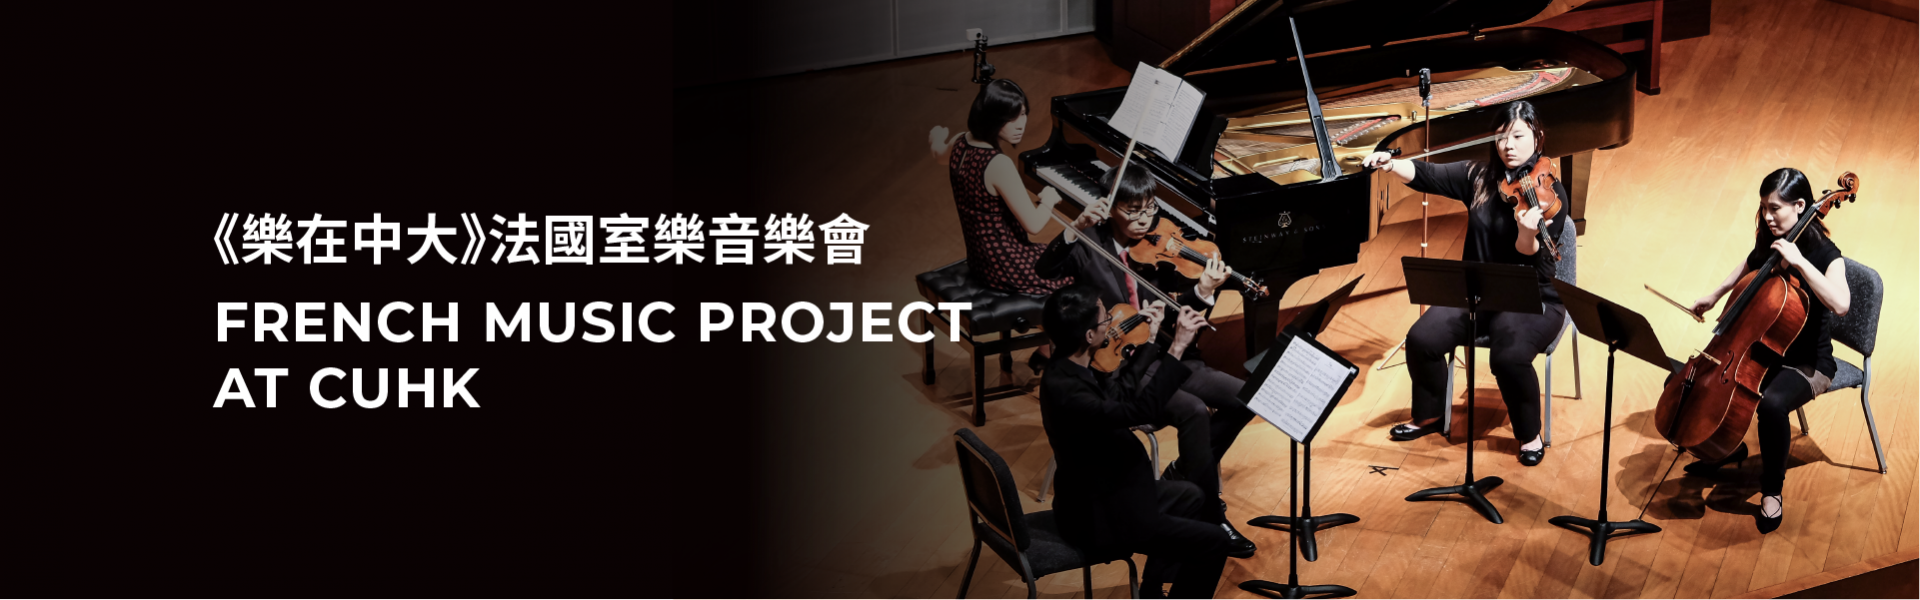 French Music Project at CUHK